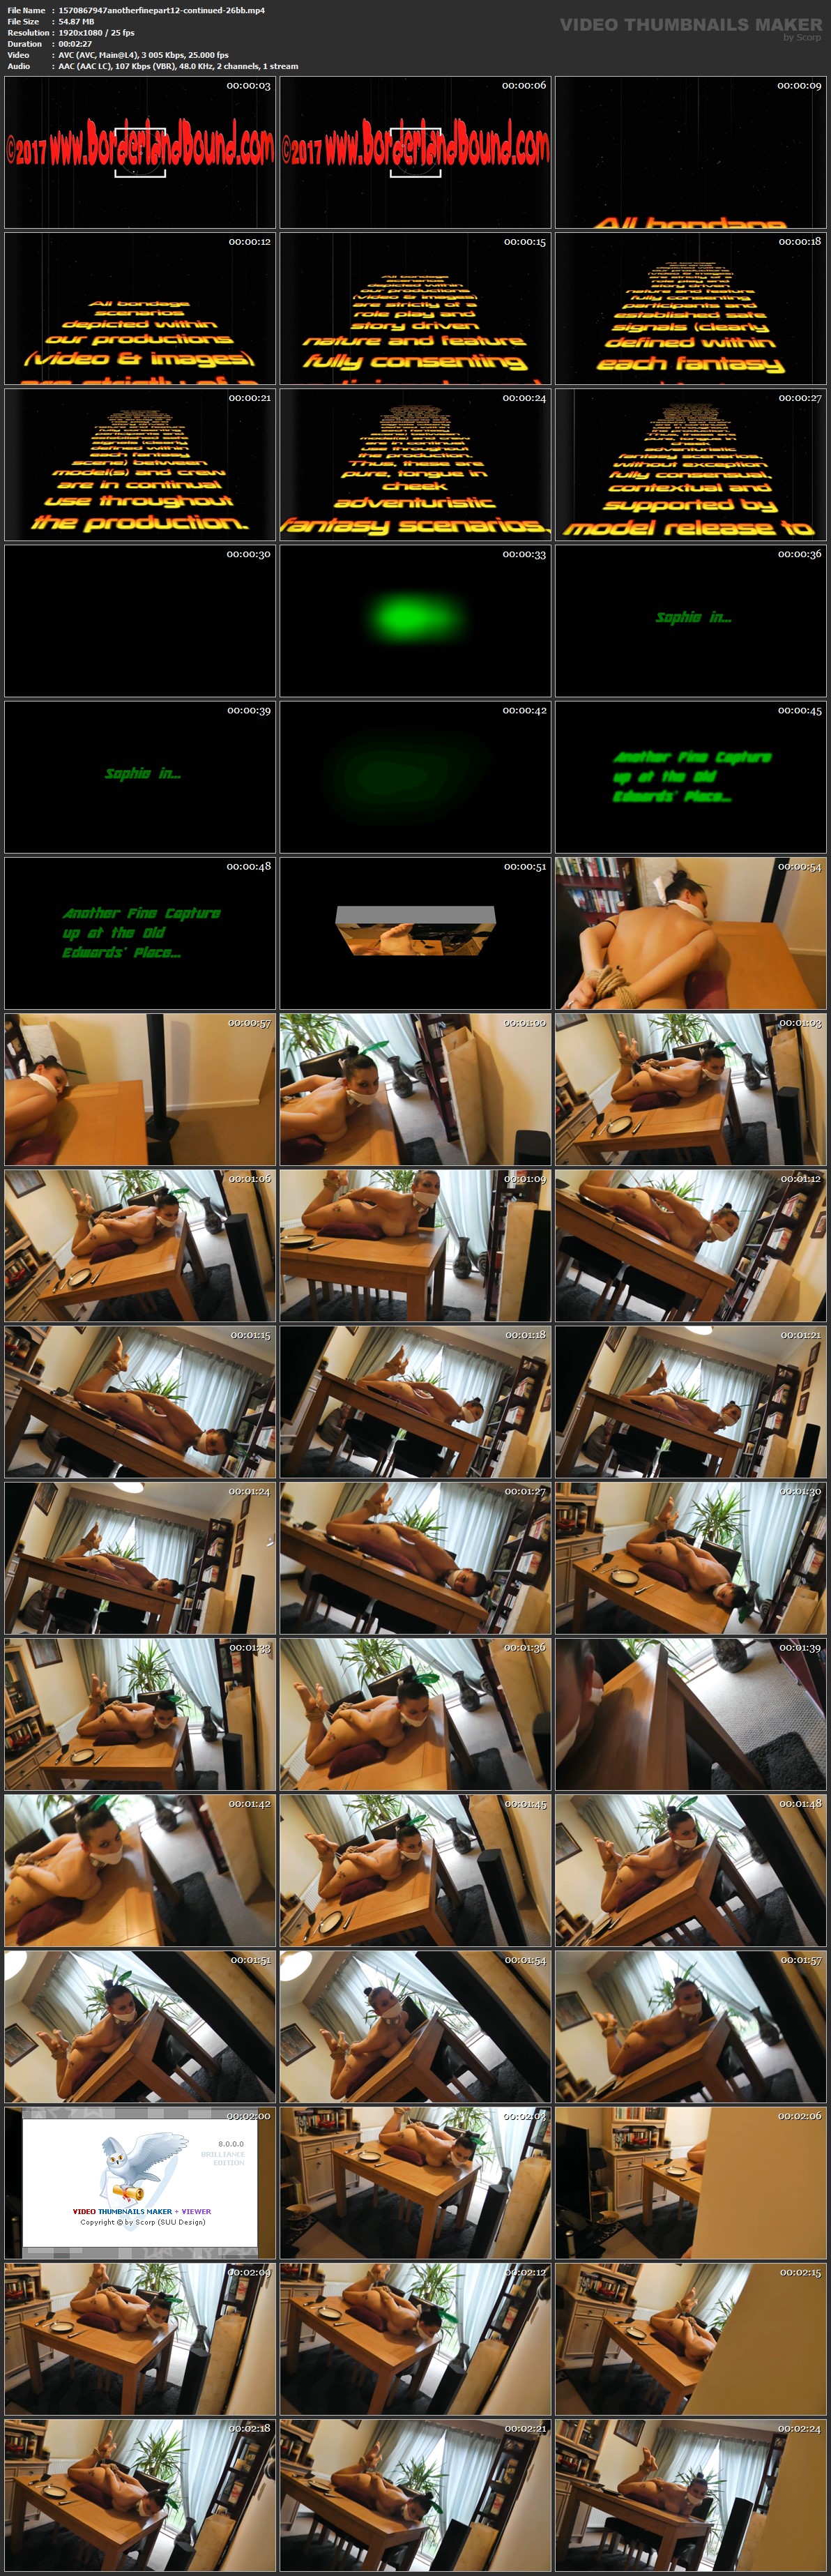 1570867947 anotherfinepart 12 continued 26 bb mp 4